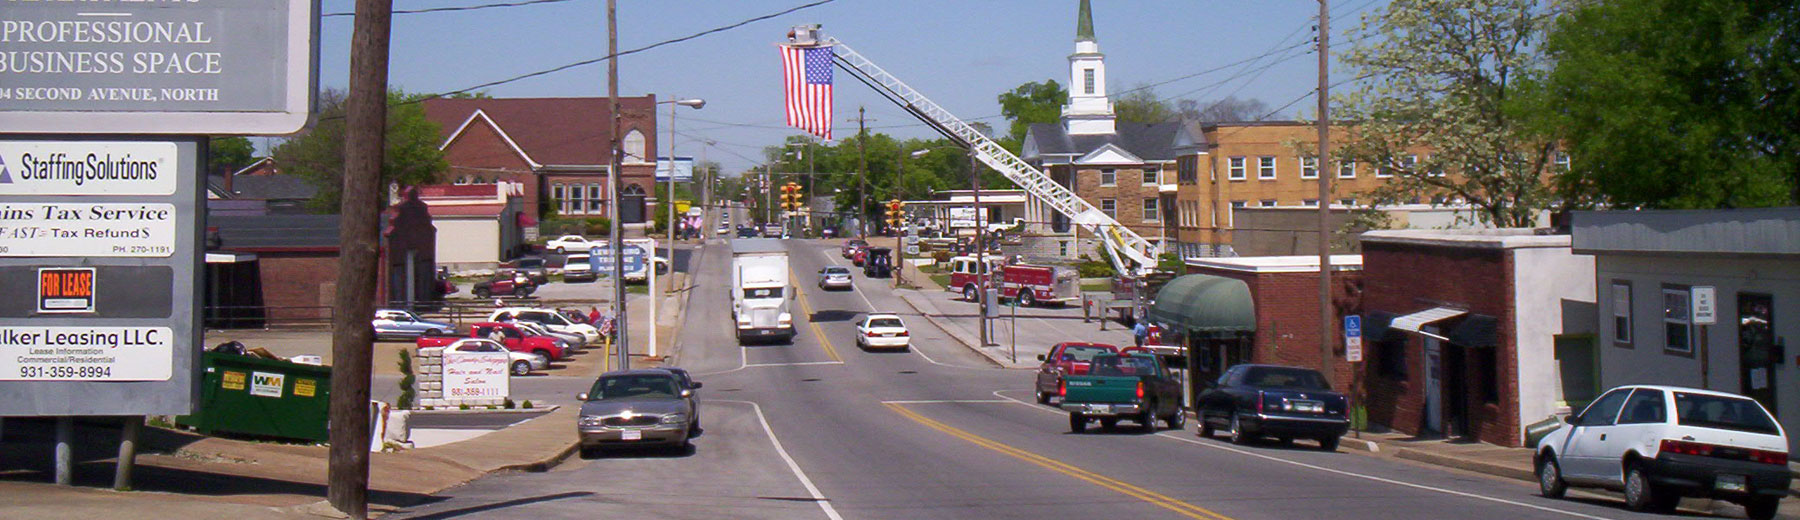 City street with fire truck ladder extended over it